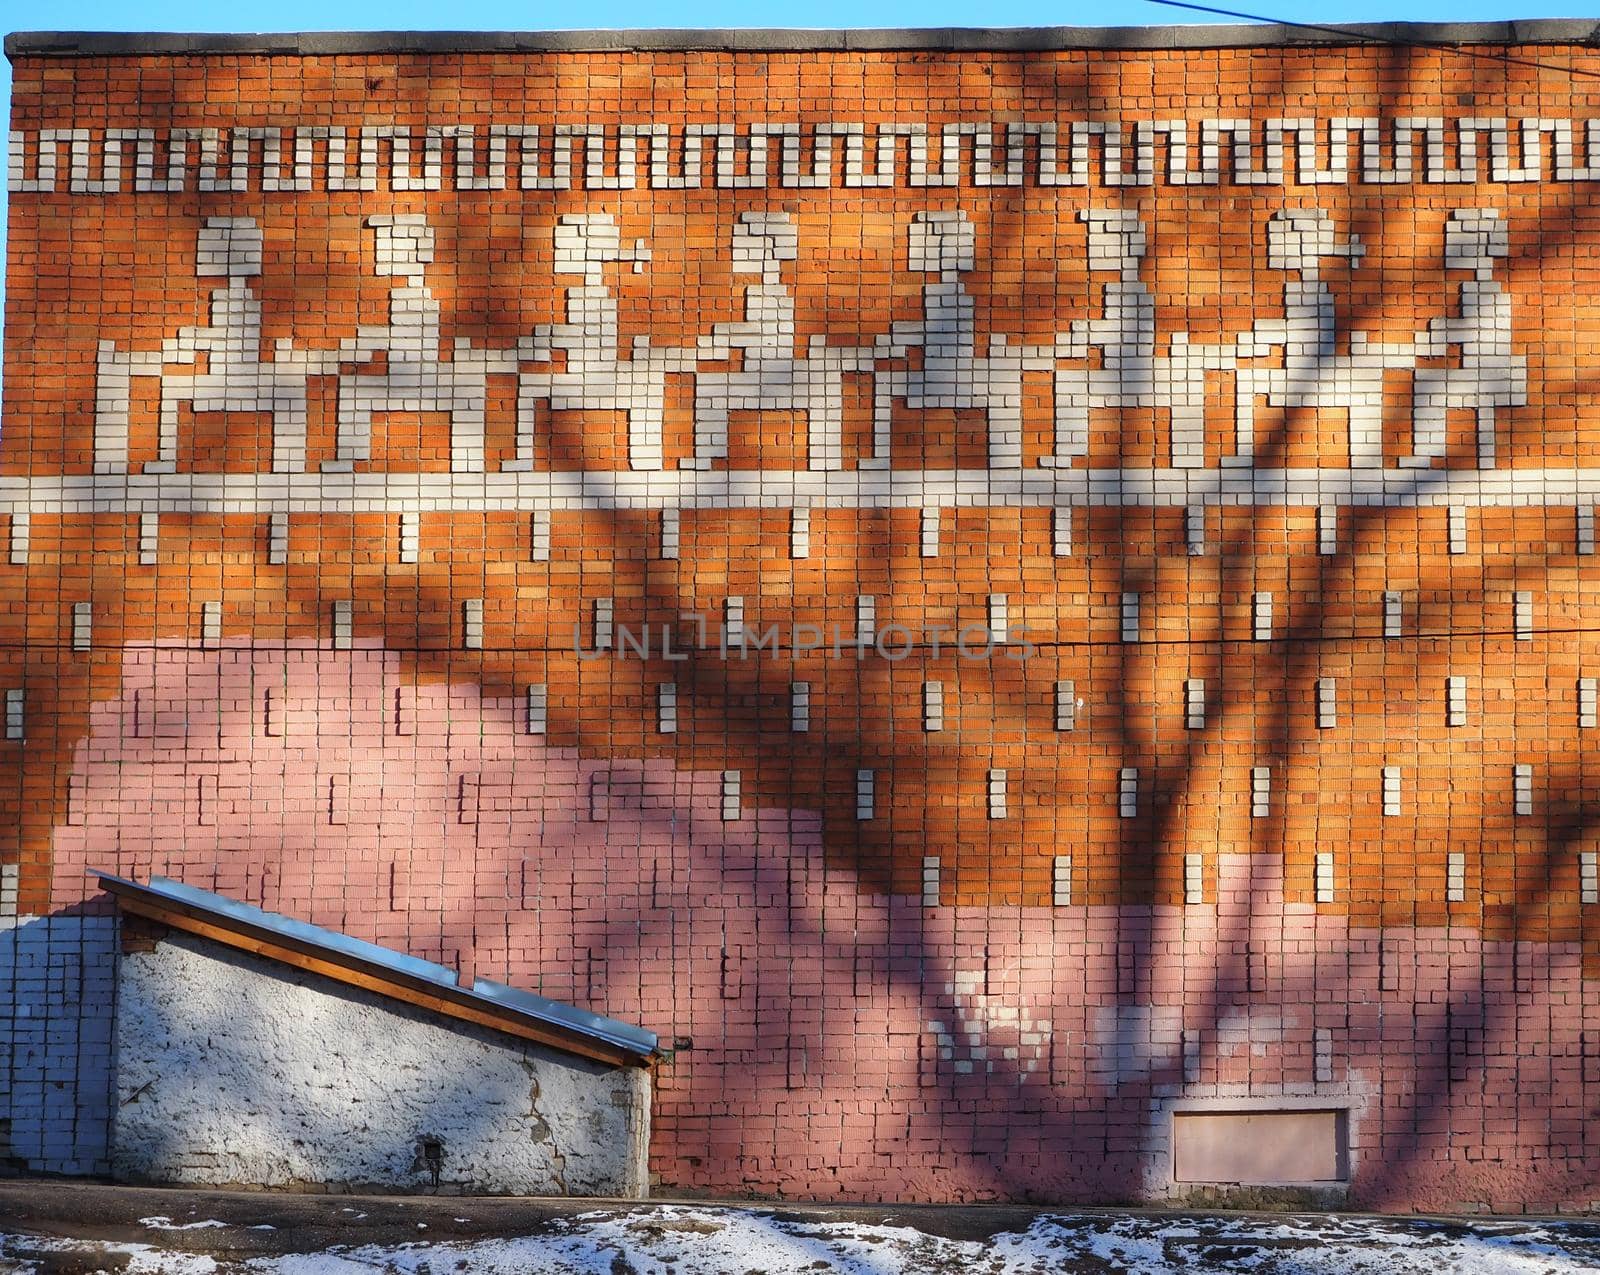 The brick wall of the school building with mosaics. by Olga26